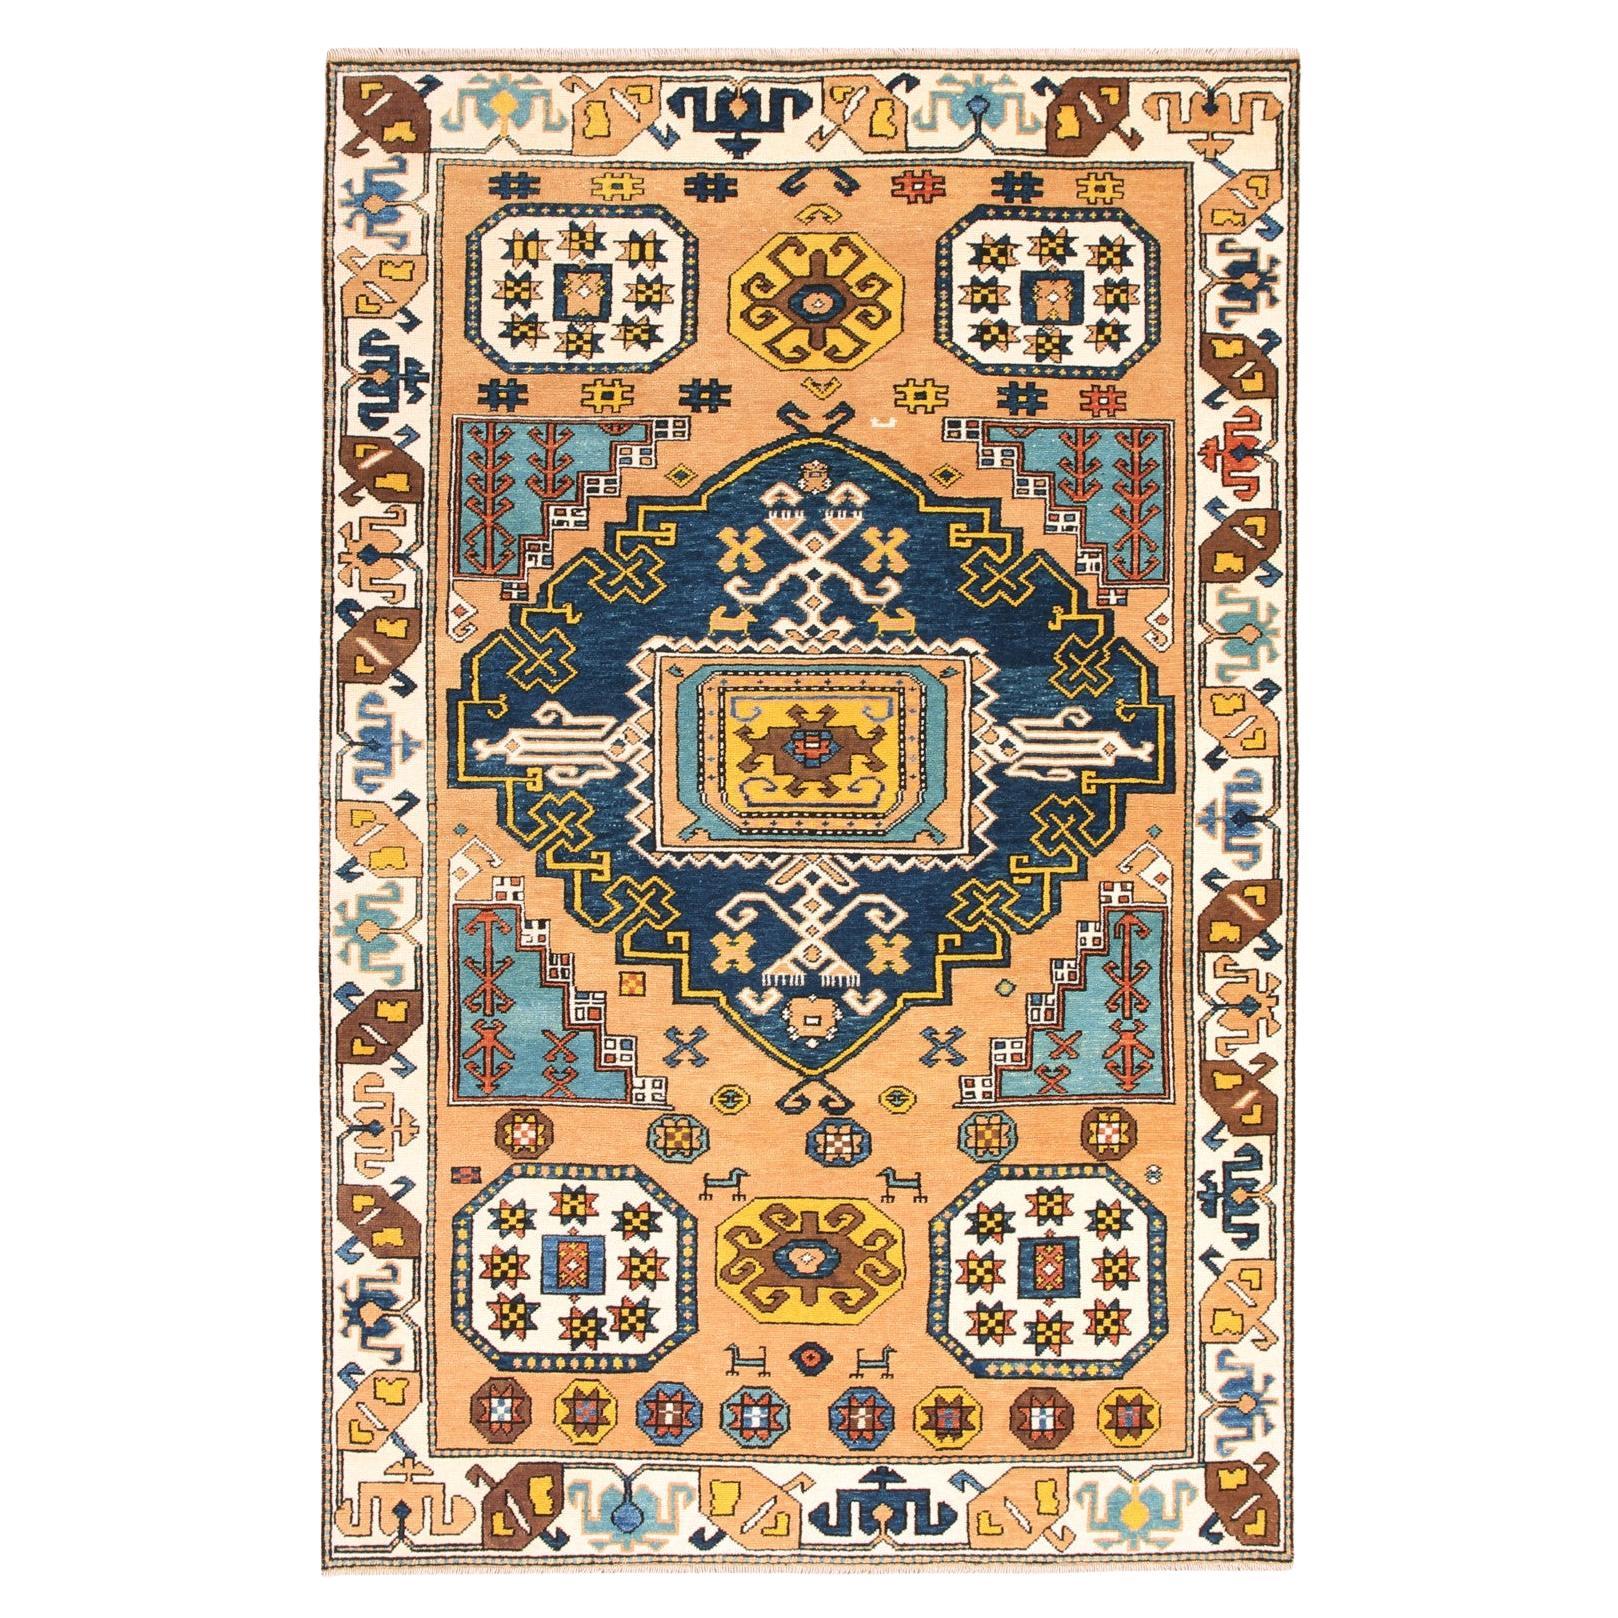 Ararat Rugs Village Rug with Medallion, Anatolian Revival Carpet Natural Dyed For Sale